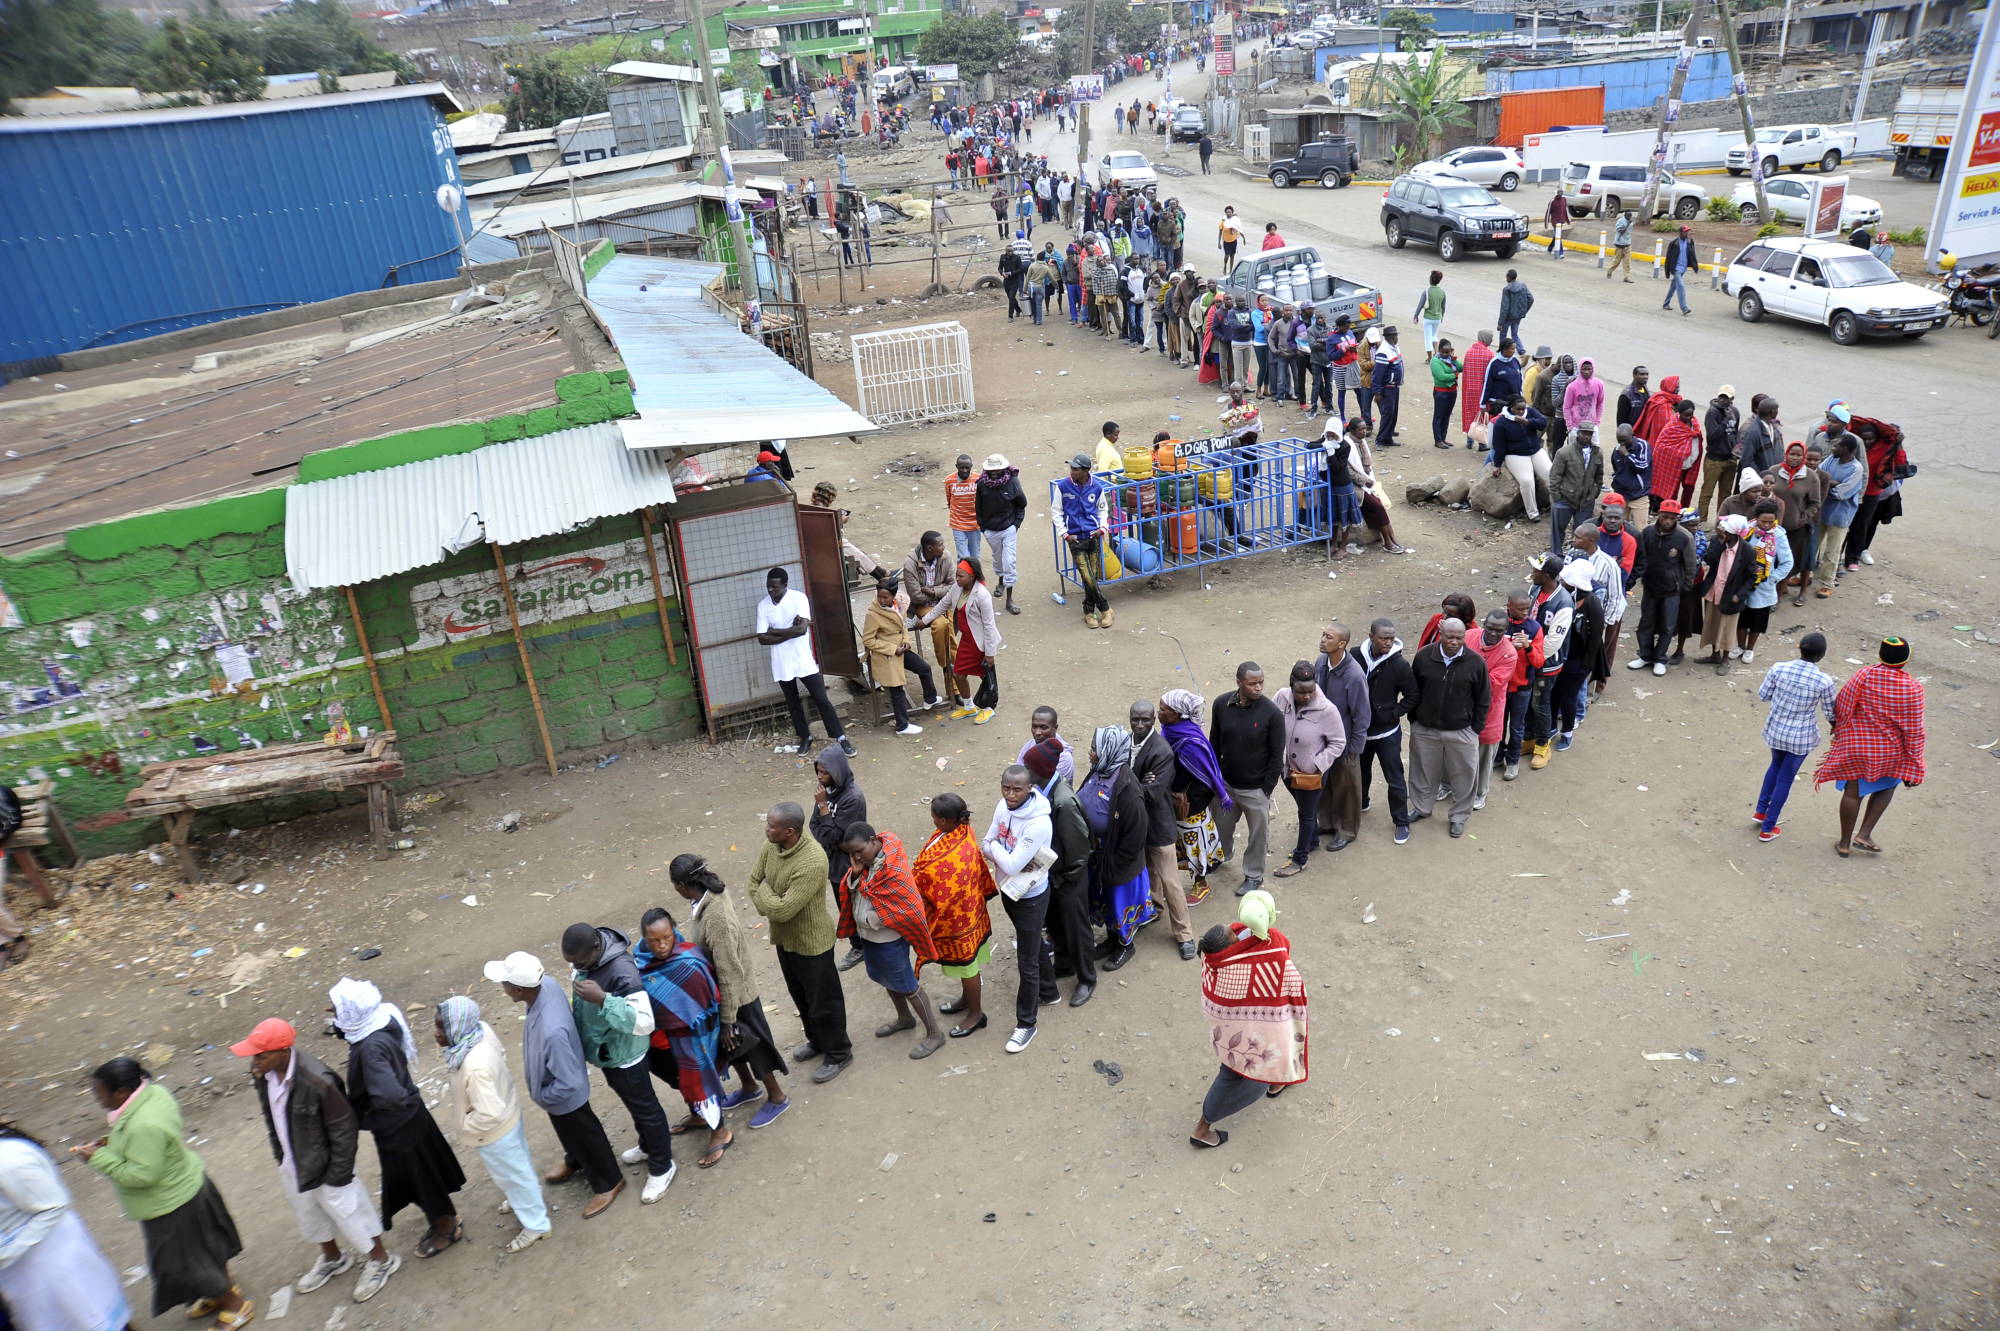 Voters queue along a street outside a polling station on Aug. 8, 2017.
